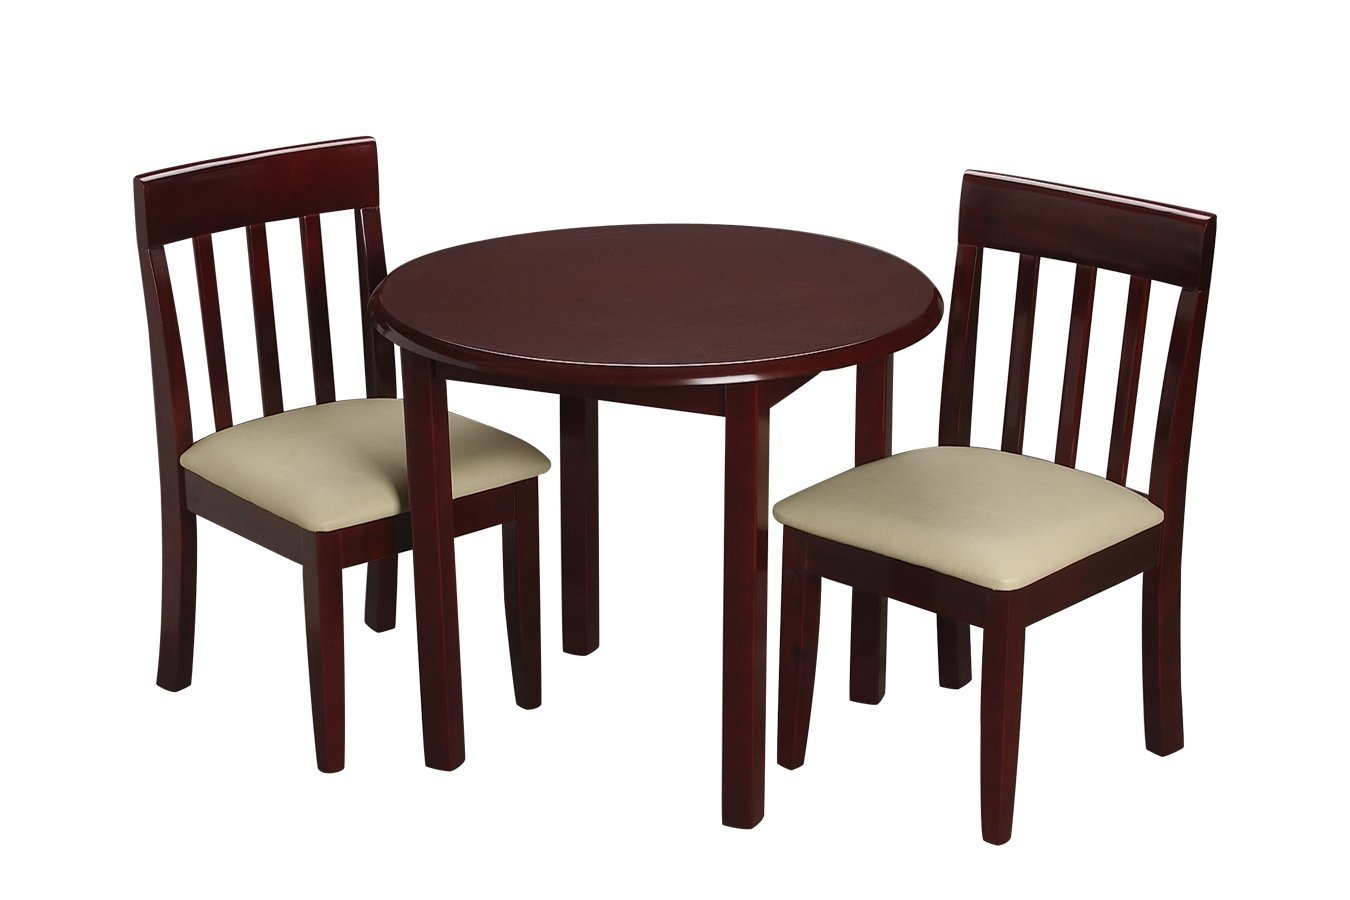 Children's 3 Piece Round Table and Chair Set